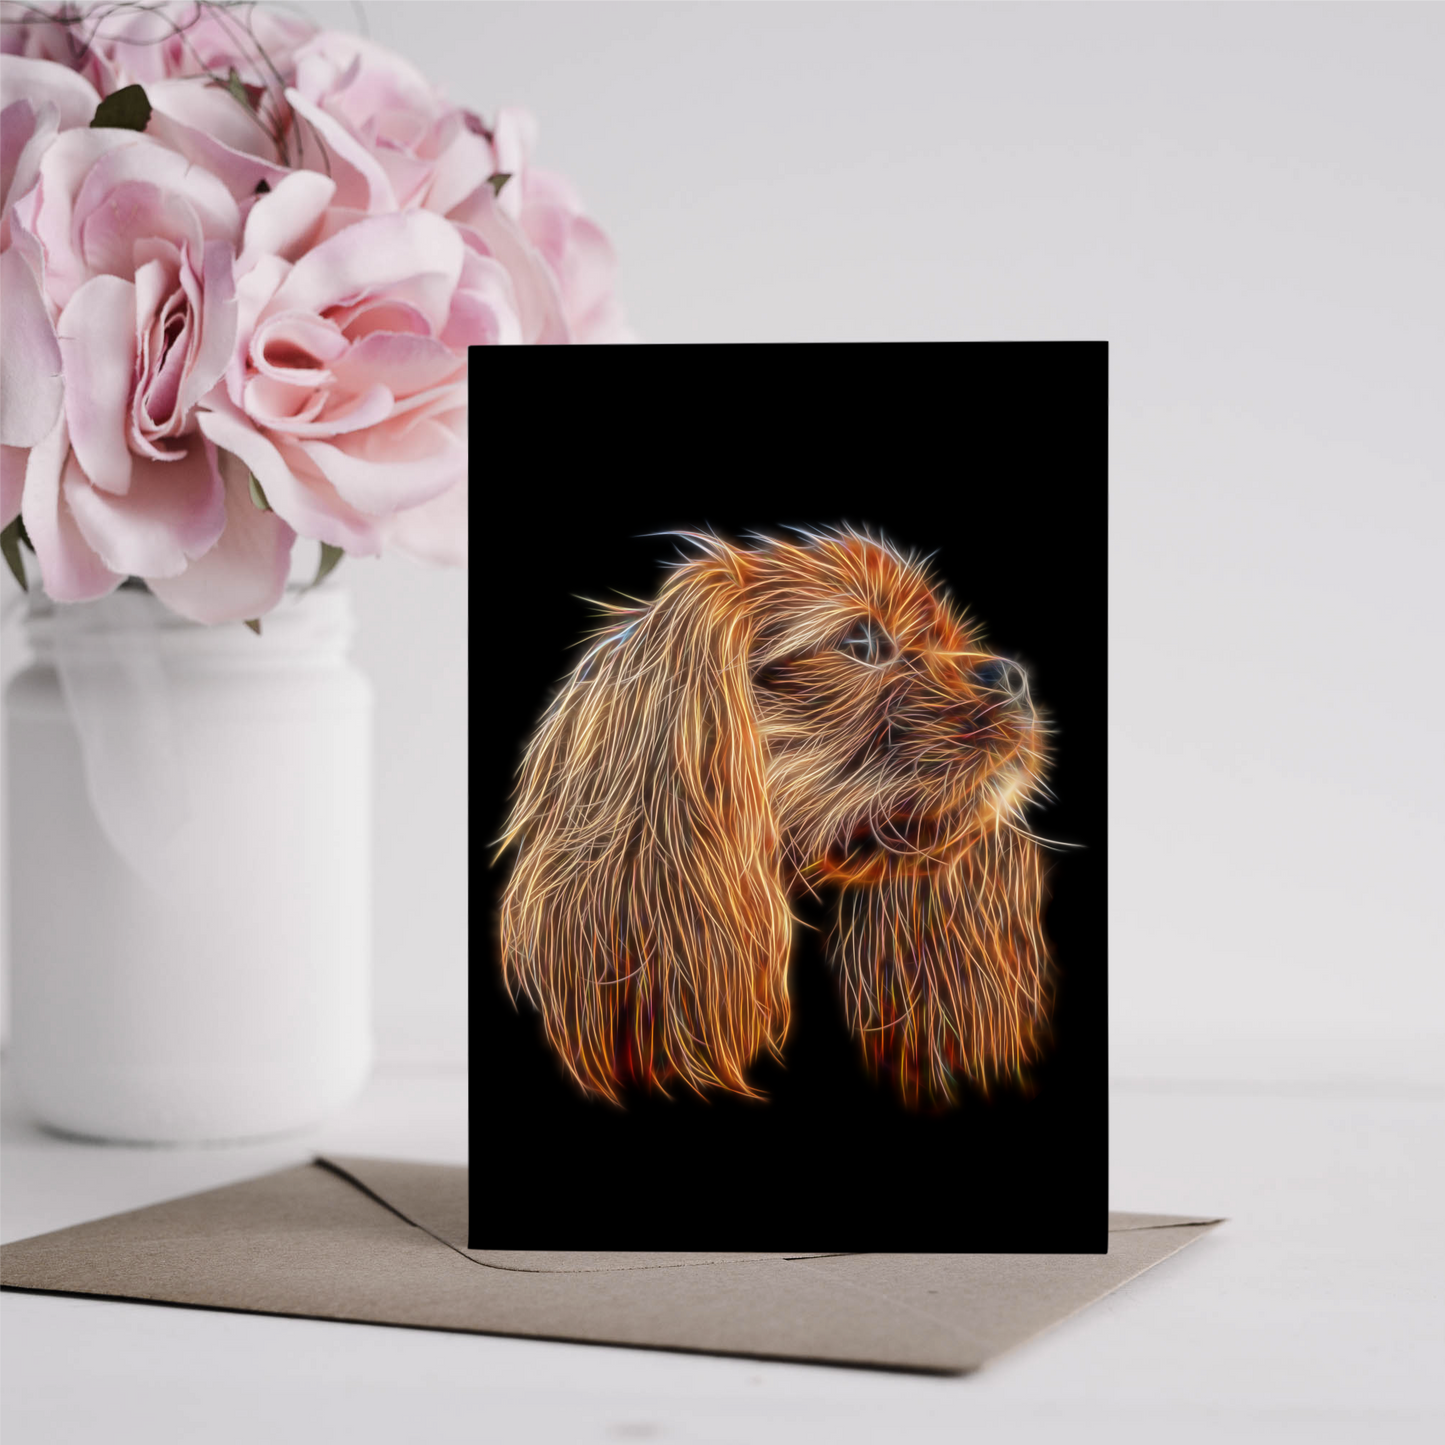 Ruby Cavalier King Charles Spaniel Greeting Card Blank Inside for Birthdays or any other Occasion